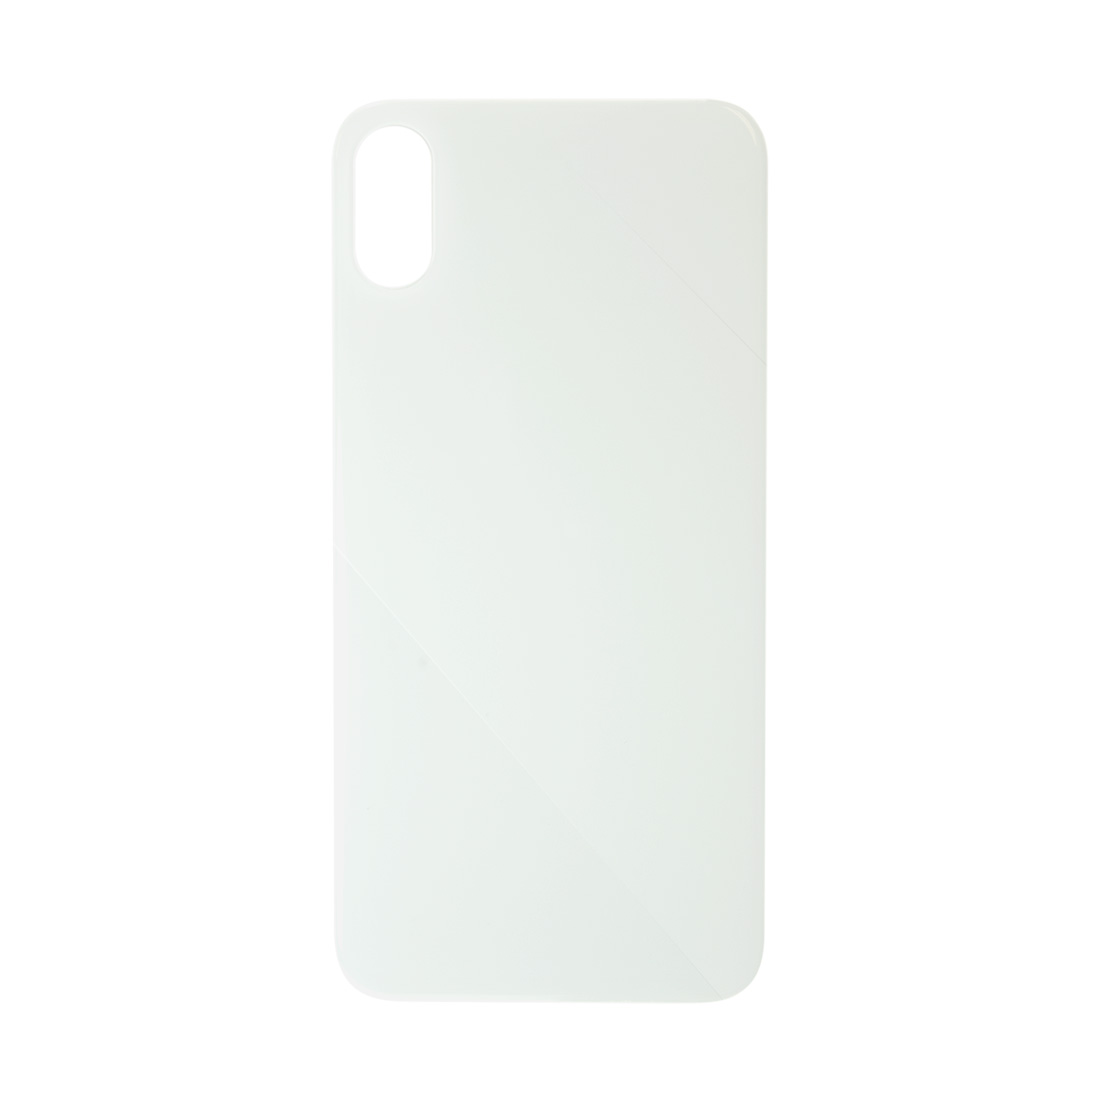 iPhone XS Back Cover - White (Large Camera Hole) - MK Mobile